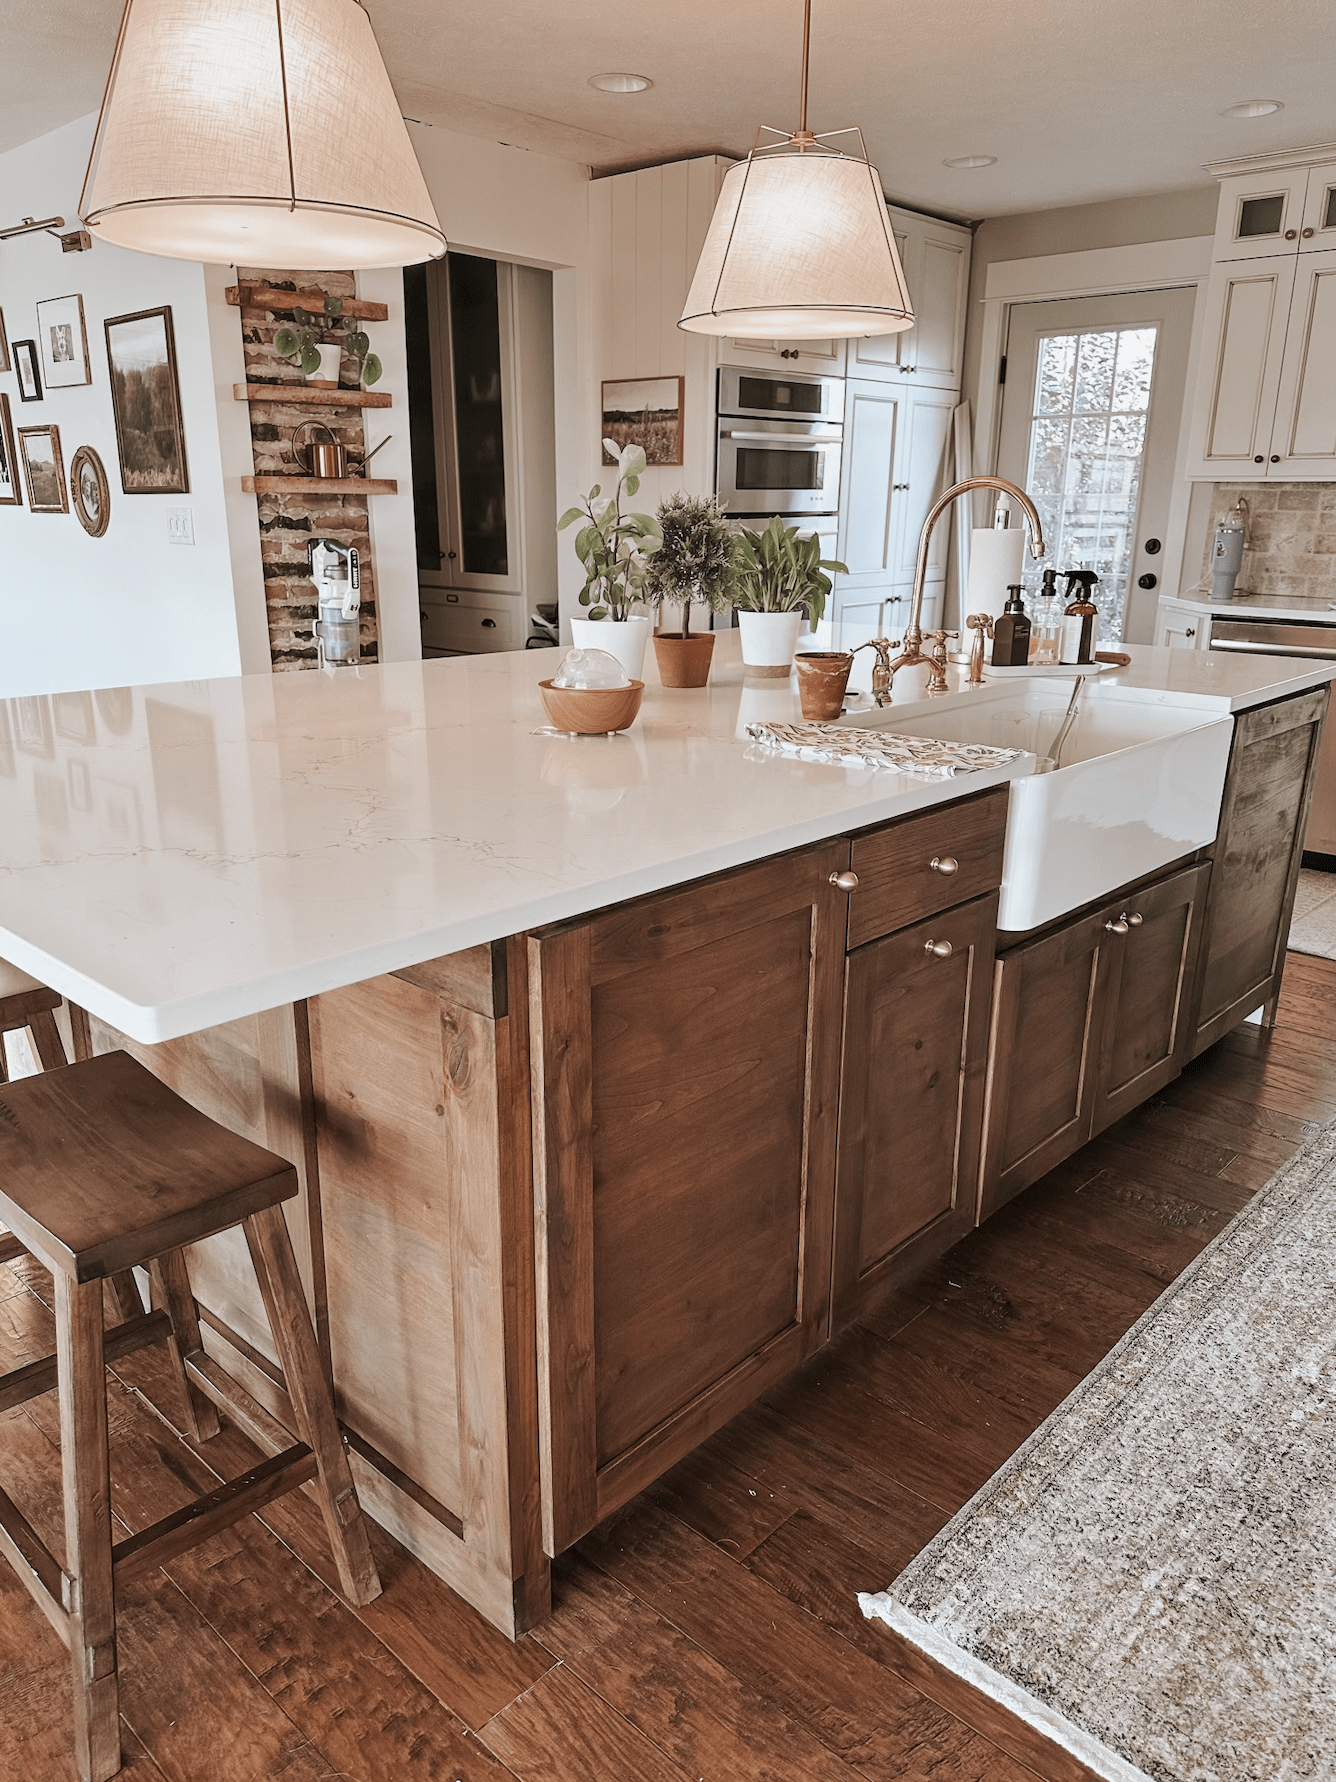 Beautiful farmhouse style kitchen island with seating, farmhouse style sink, antique brass faucet.